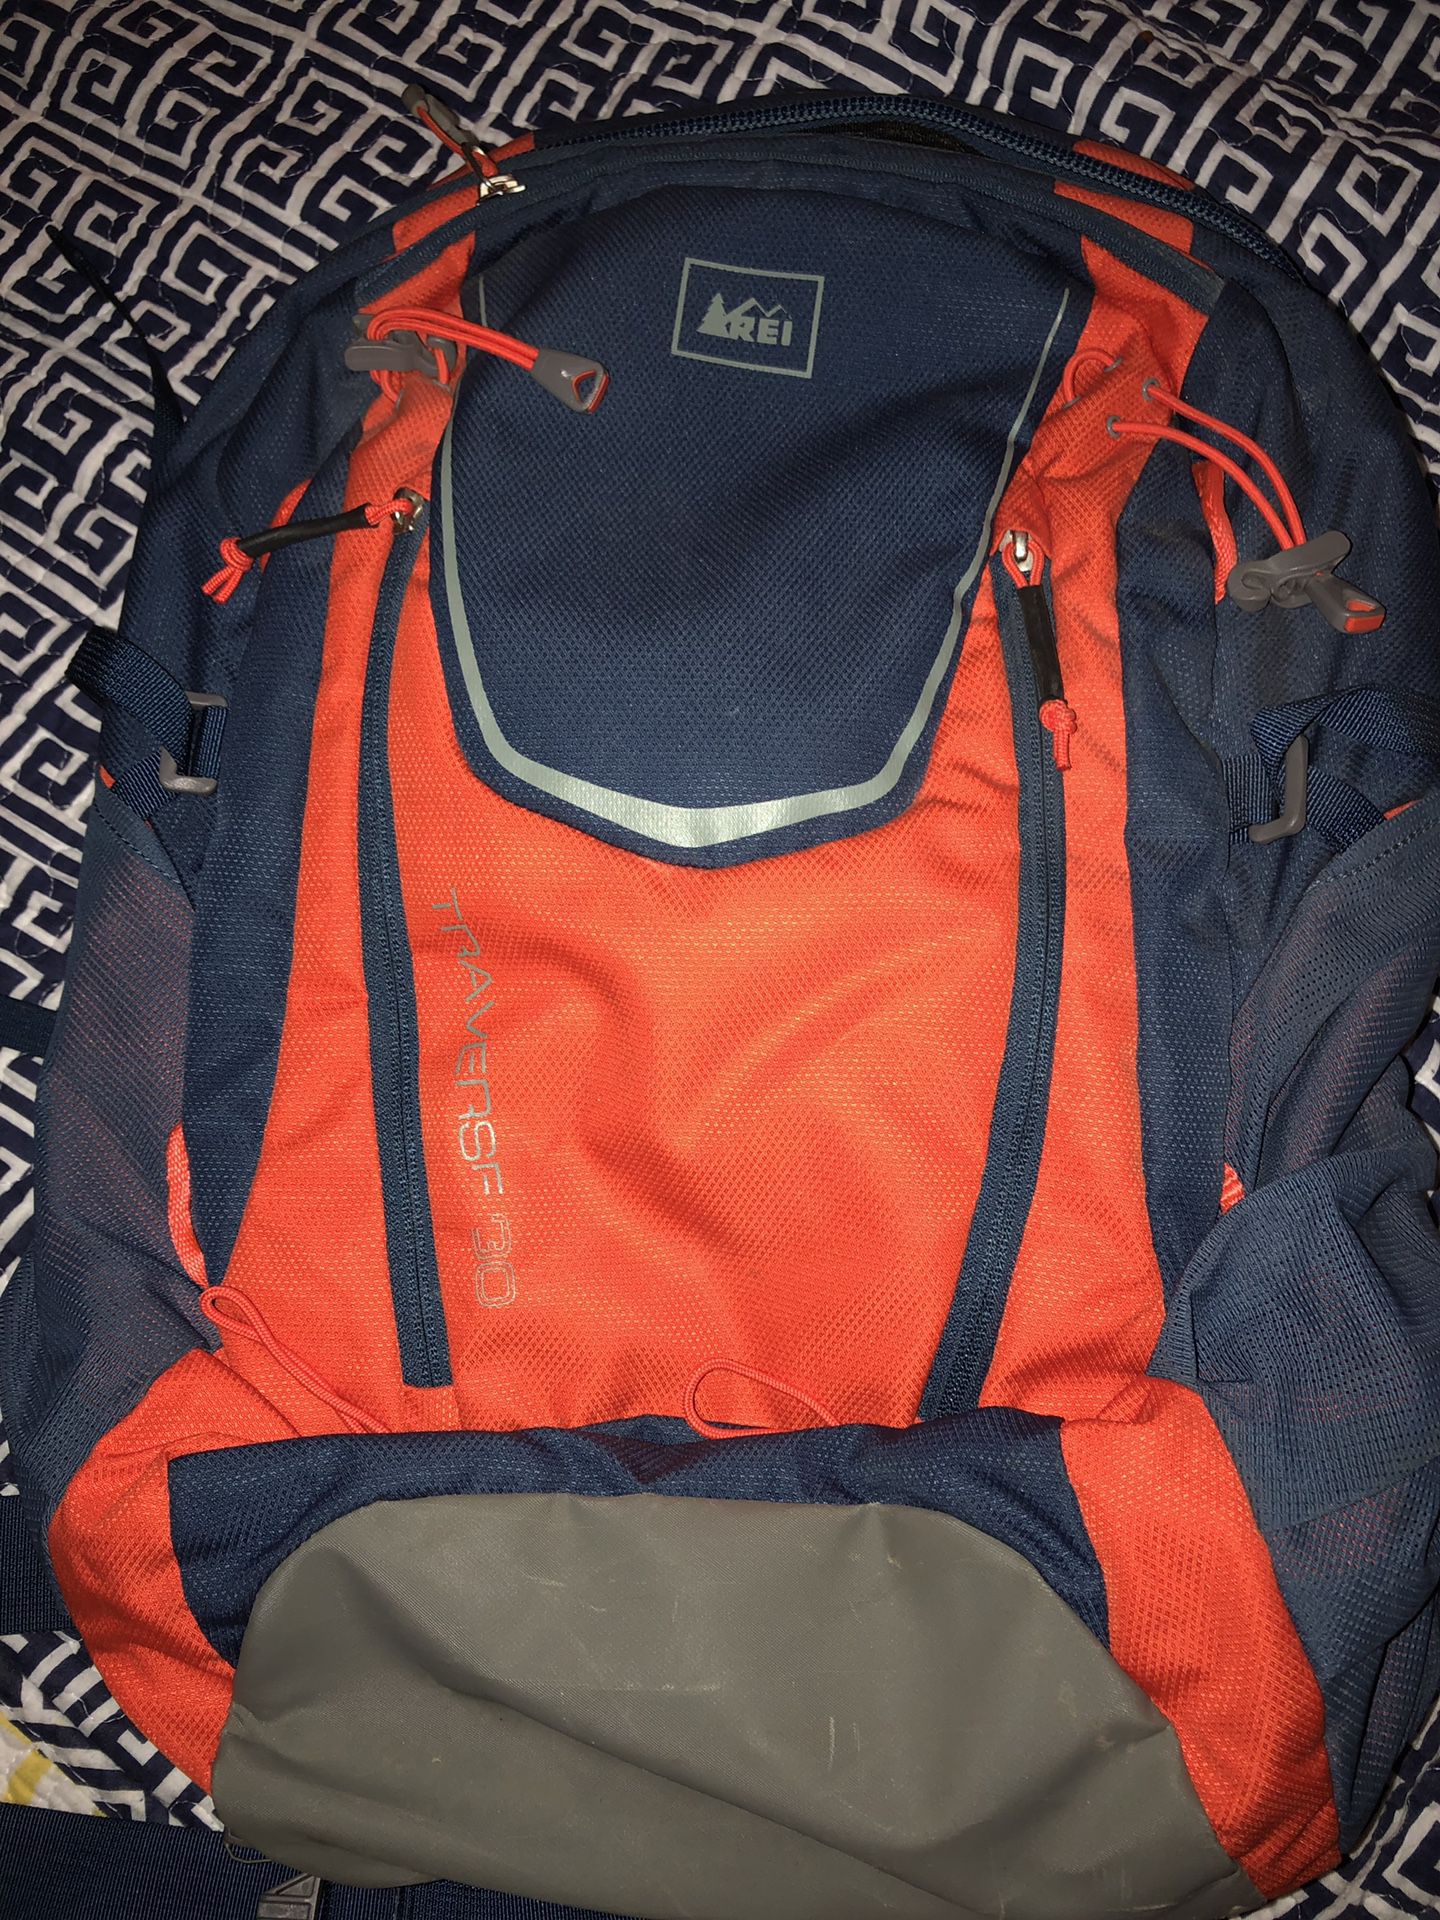 REI Traverse 30 Hydration Backpack